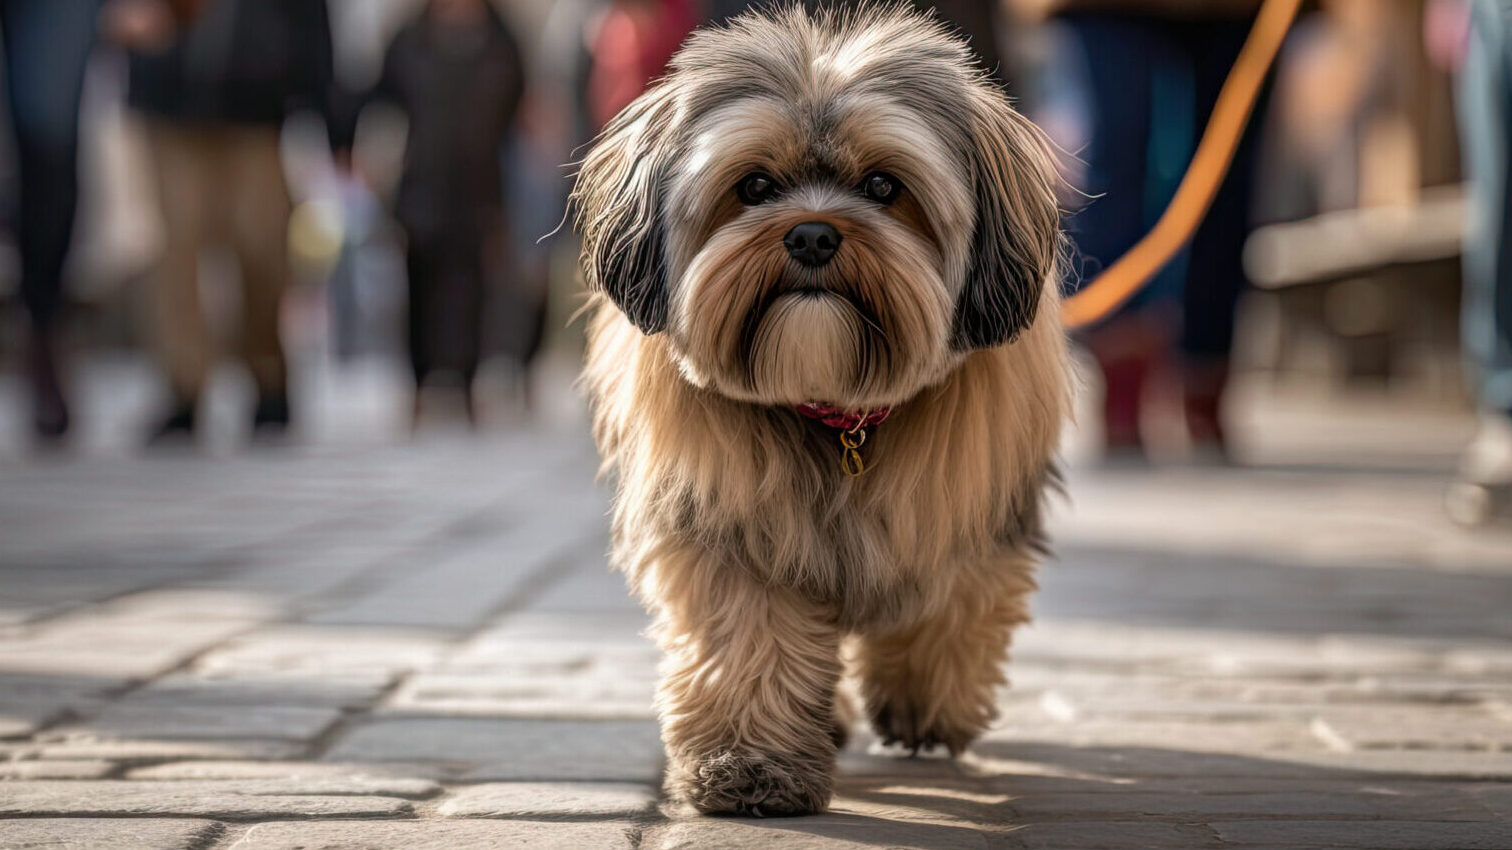 Lhasa apso on a lead being walked along the street